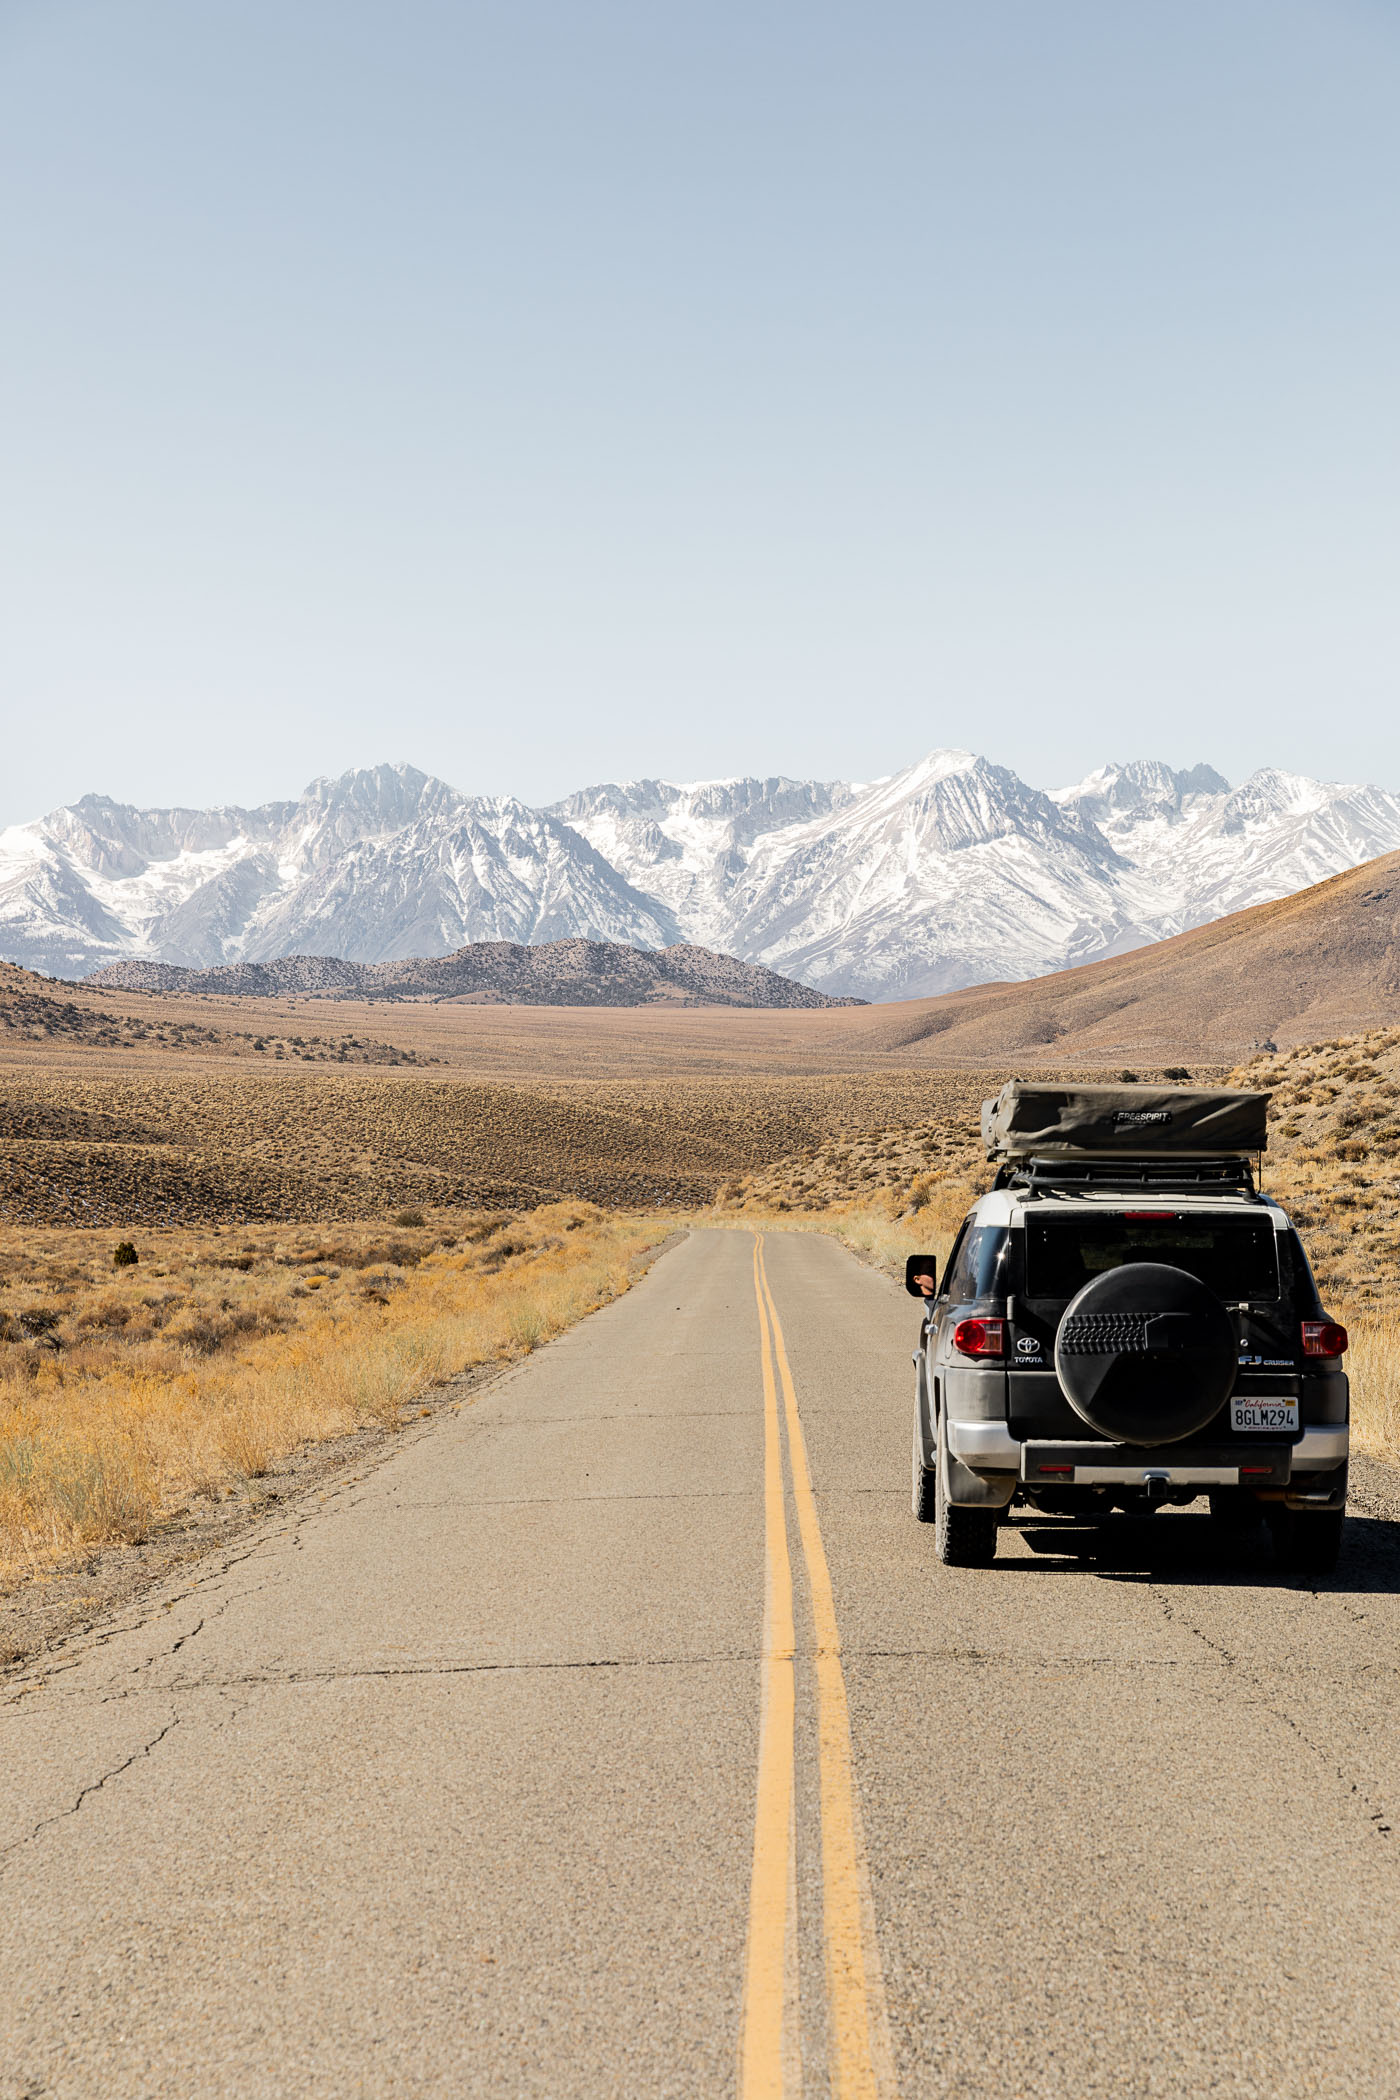 Overlanding 101 near Whitney Portal - An out-of-this-world road trip through California